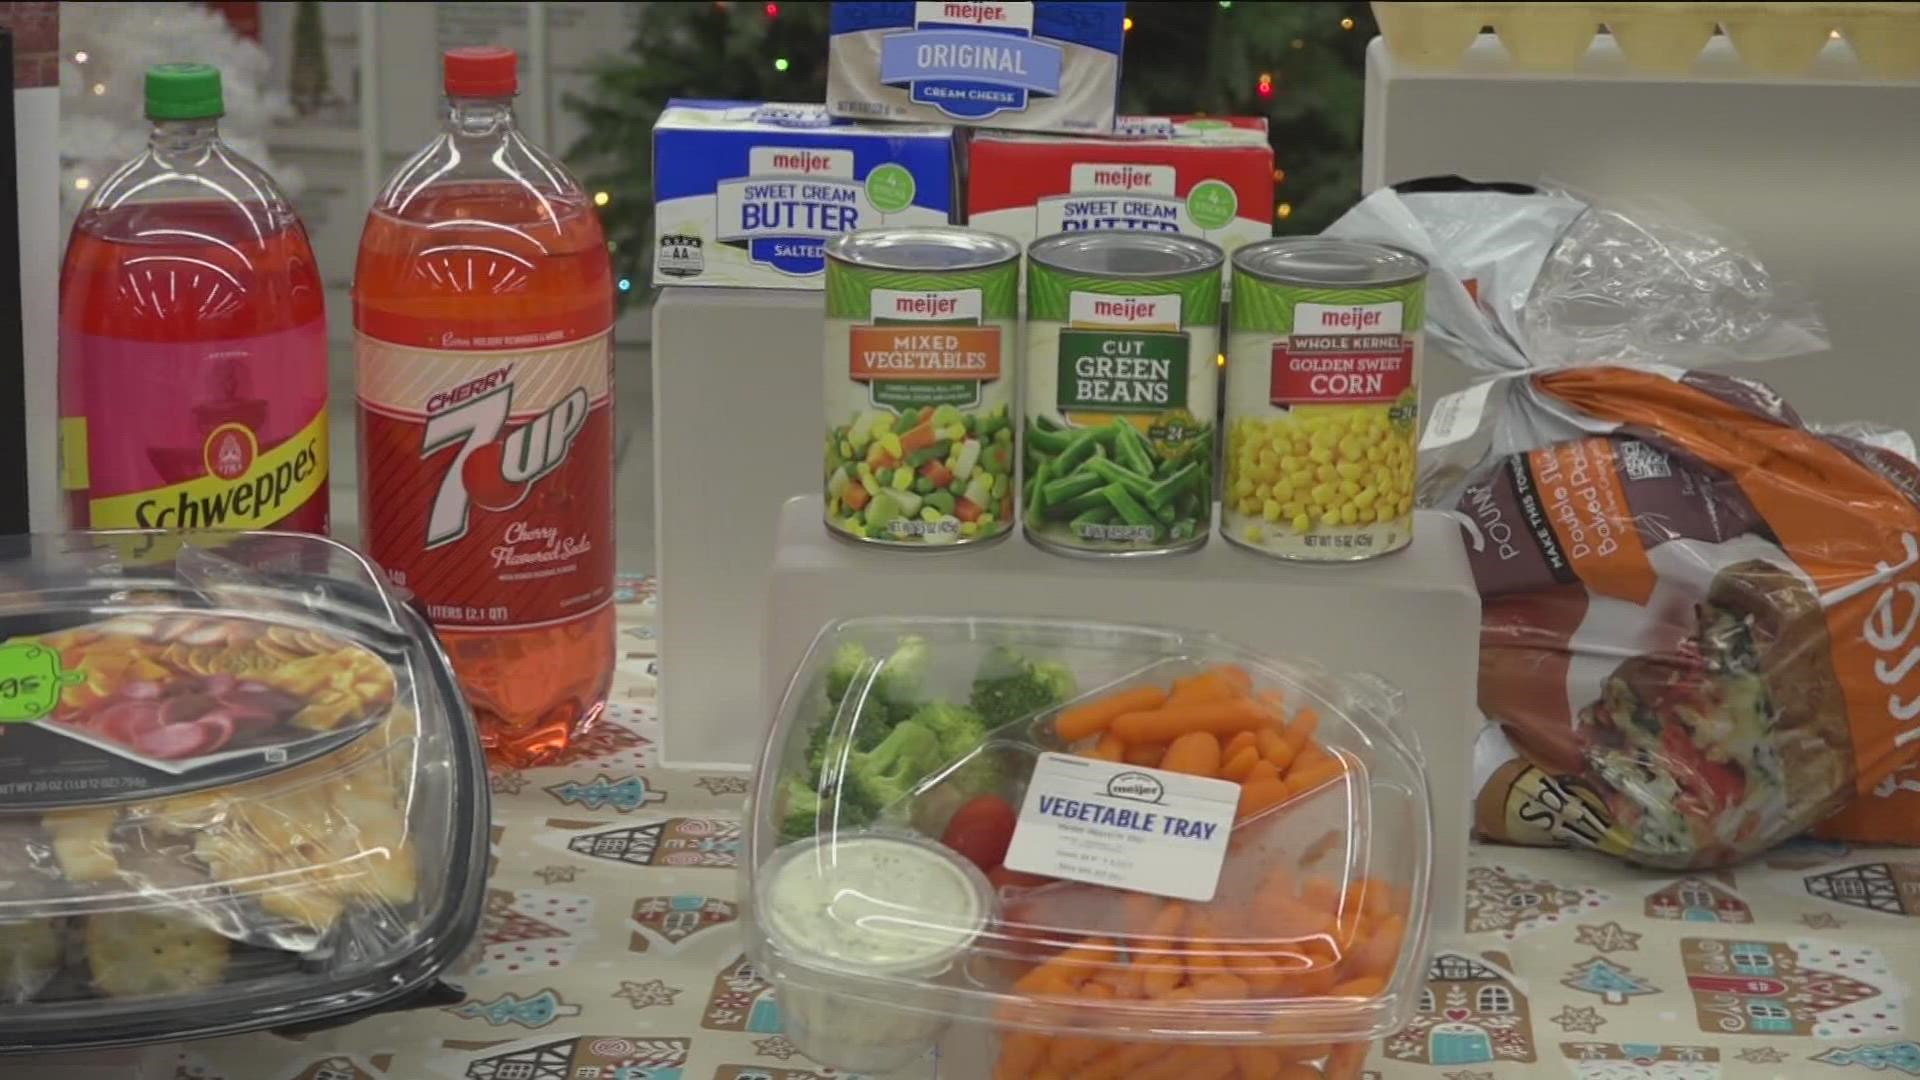 The owner of a local Meijer listed off some of the items for Thanksgiving dinners that he sees last-minute shoppers often picking up.